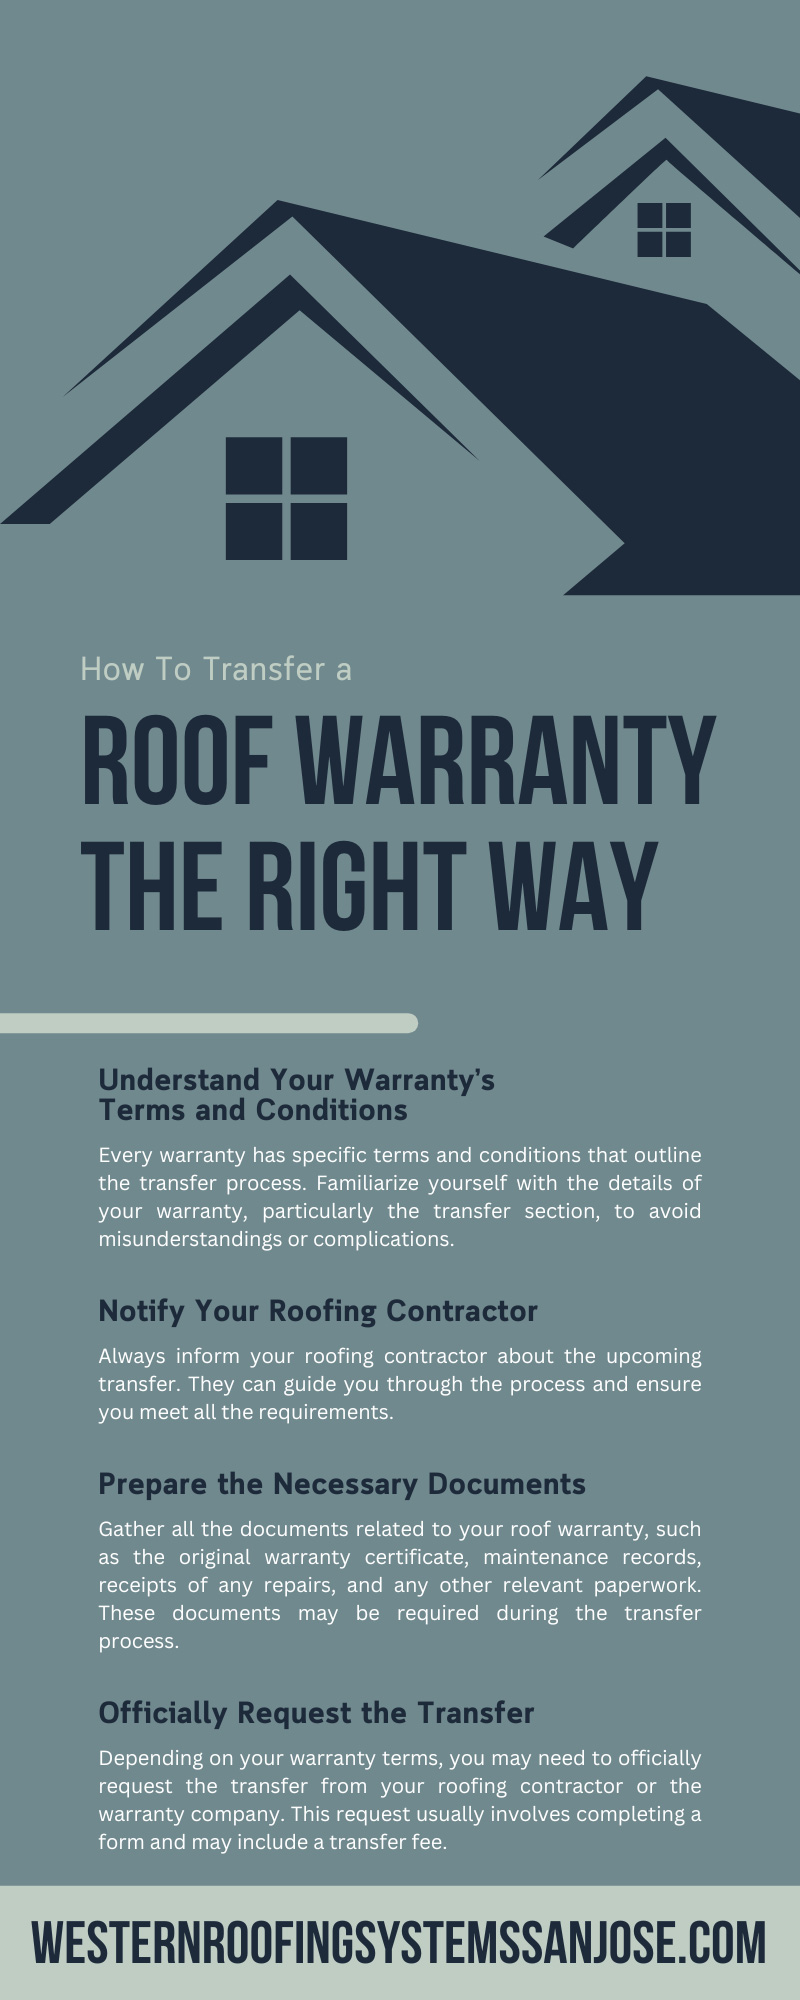 How To Transfer a Roof Warranty the Right Way